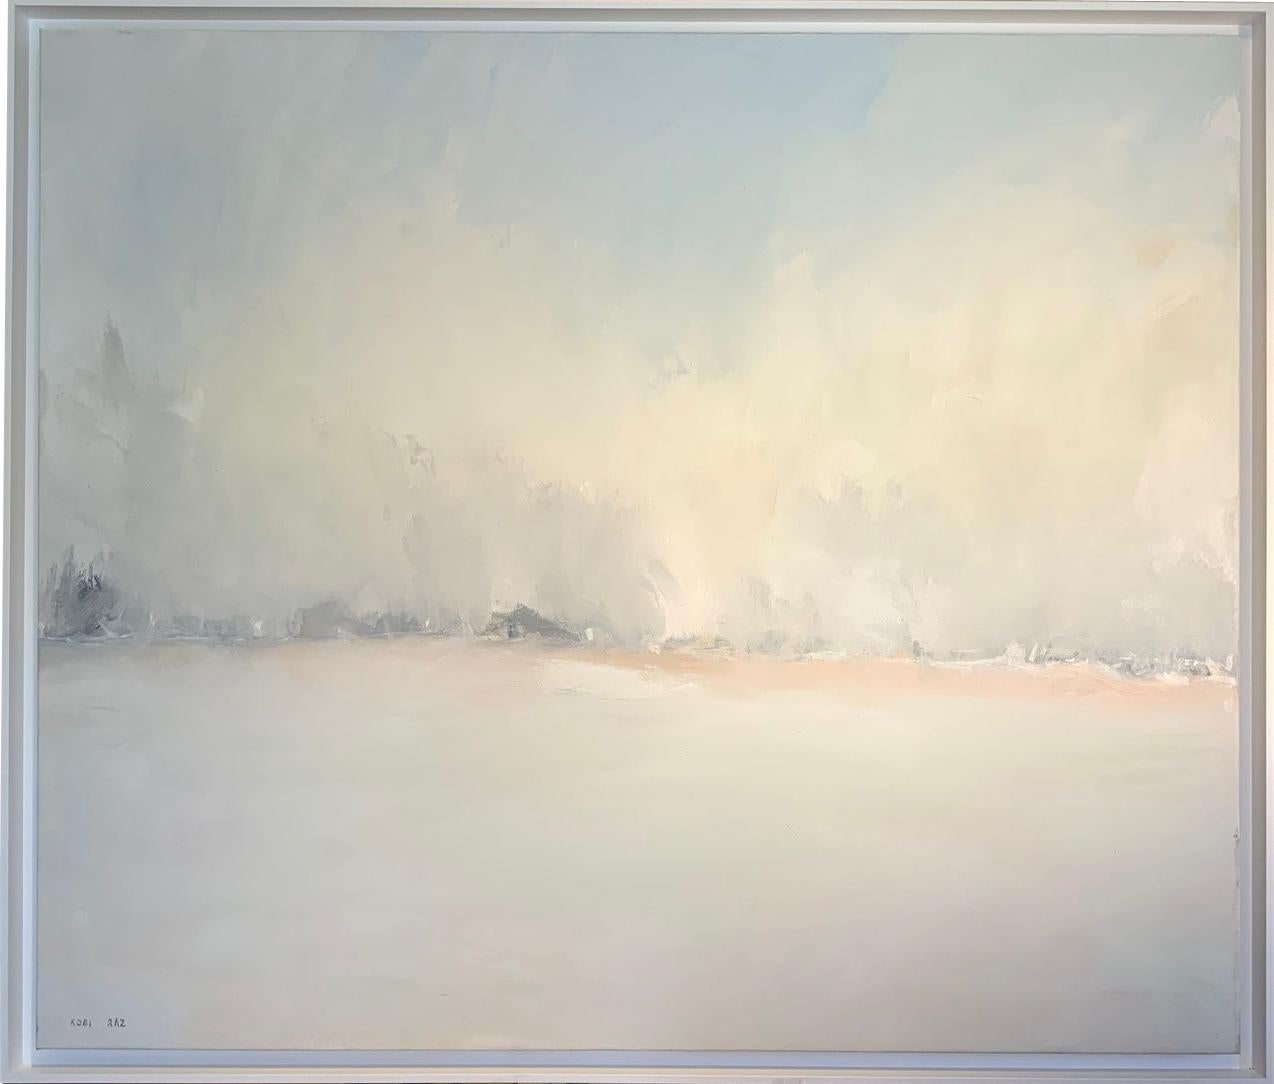 Kobi Raz's masterful representation of the ethereal interplay between light and nature is evident in this contemporary landscape abstract. The piece exudes a tranquil serenity, where the artist employs a gentle and muted palette of soft whites,